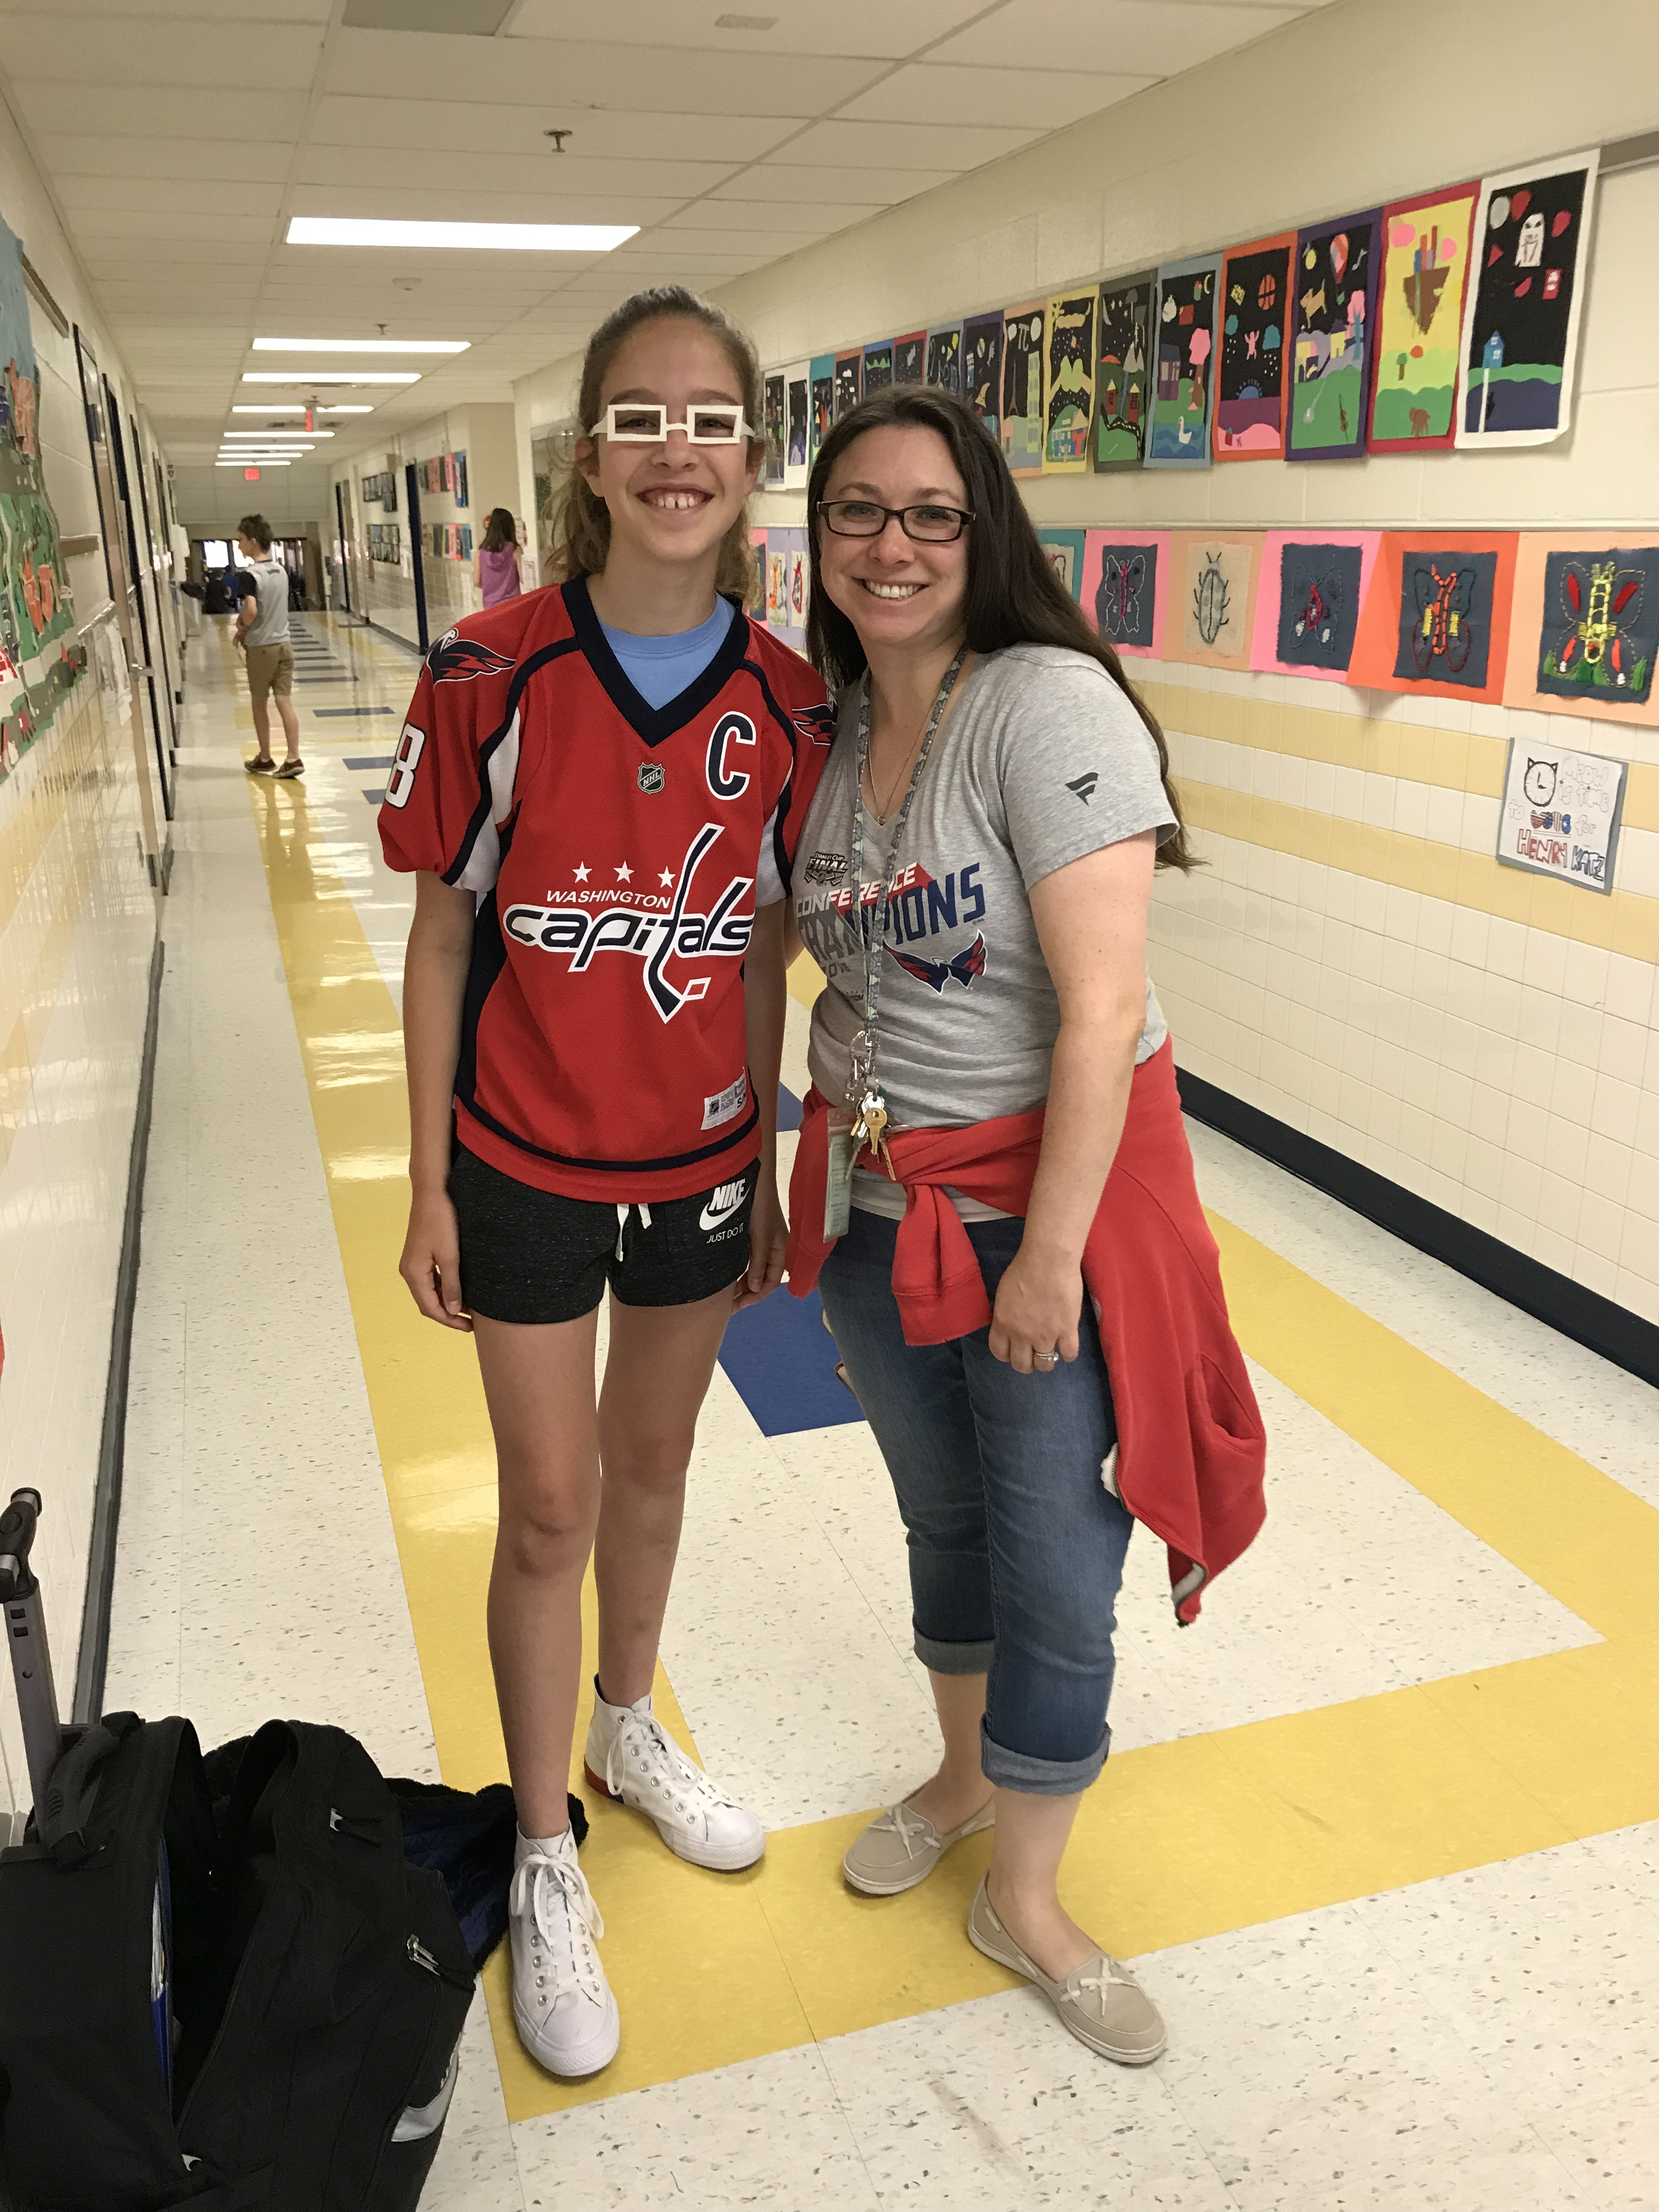 mrs. blitch poses in the hallway with a student. both subjects are wearing washington capitals clothing.